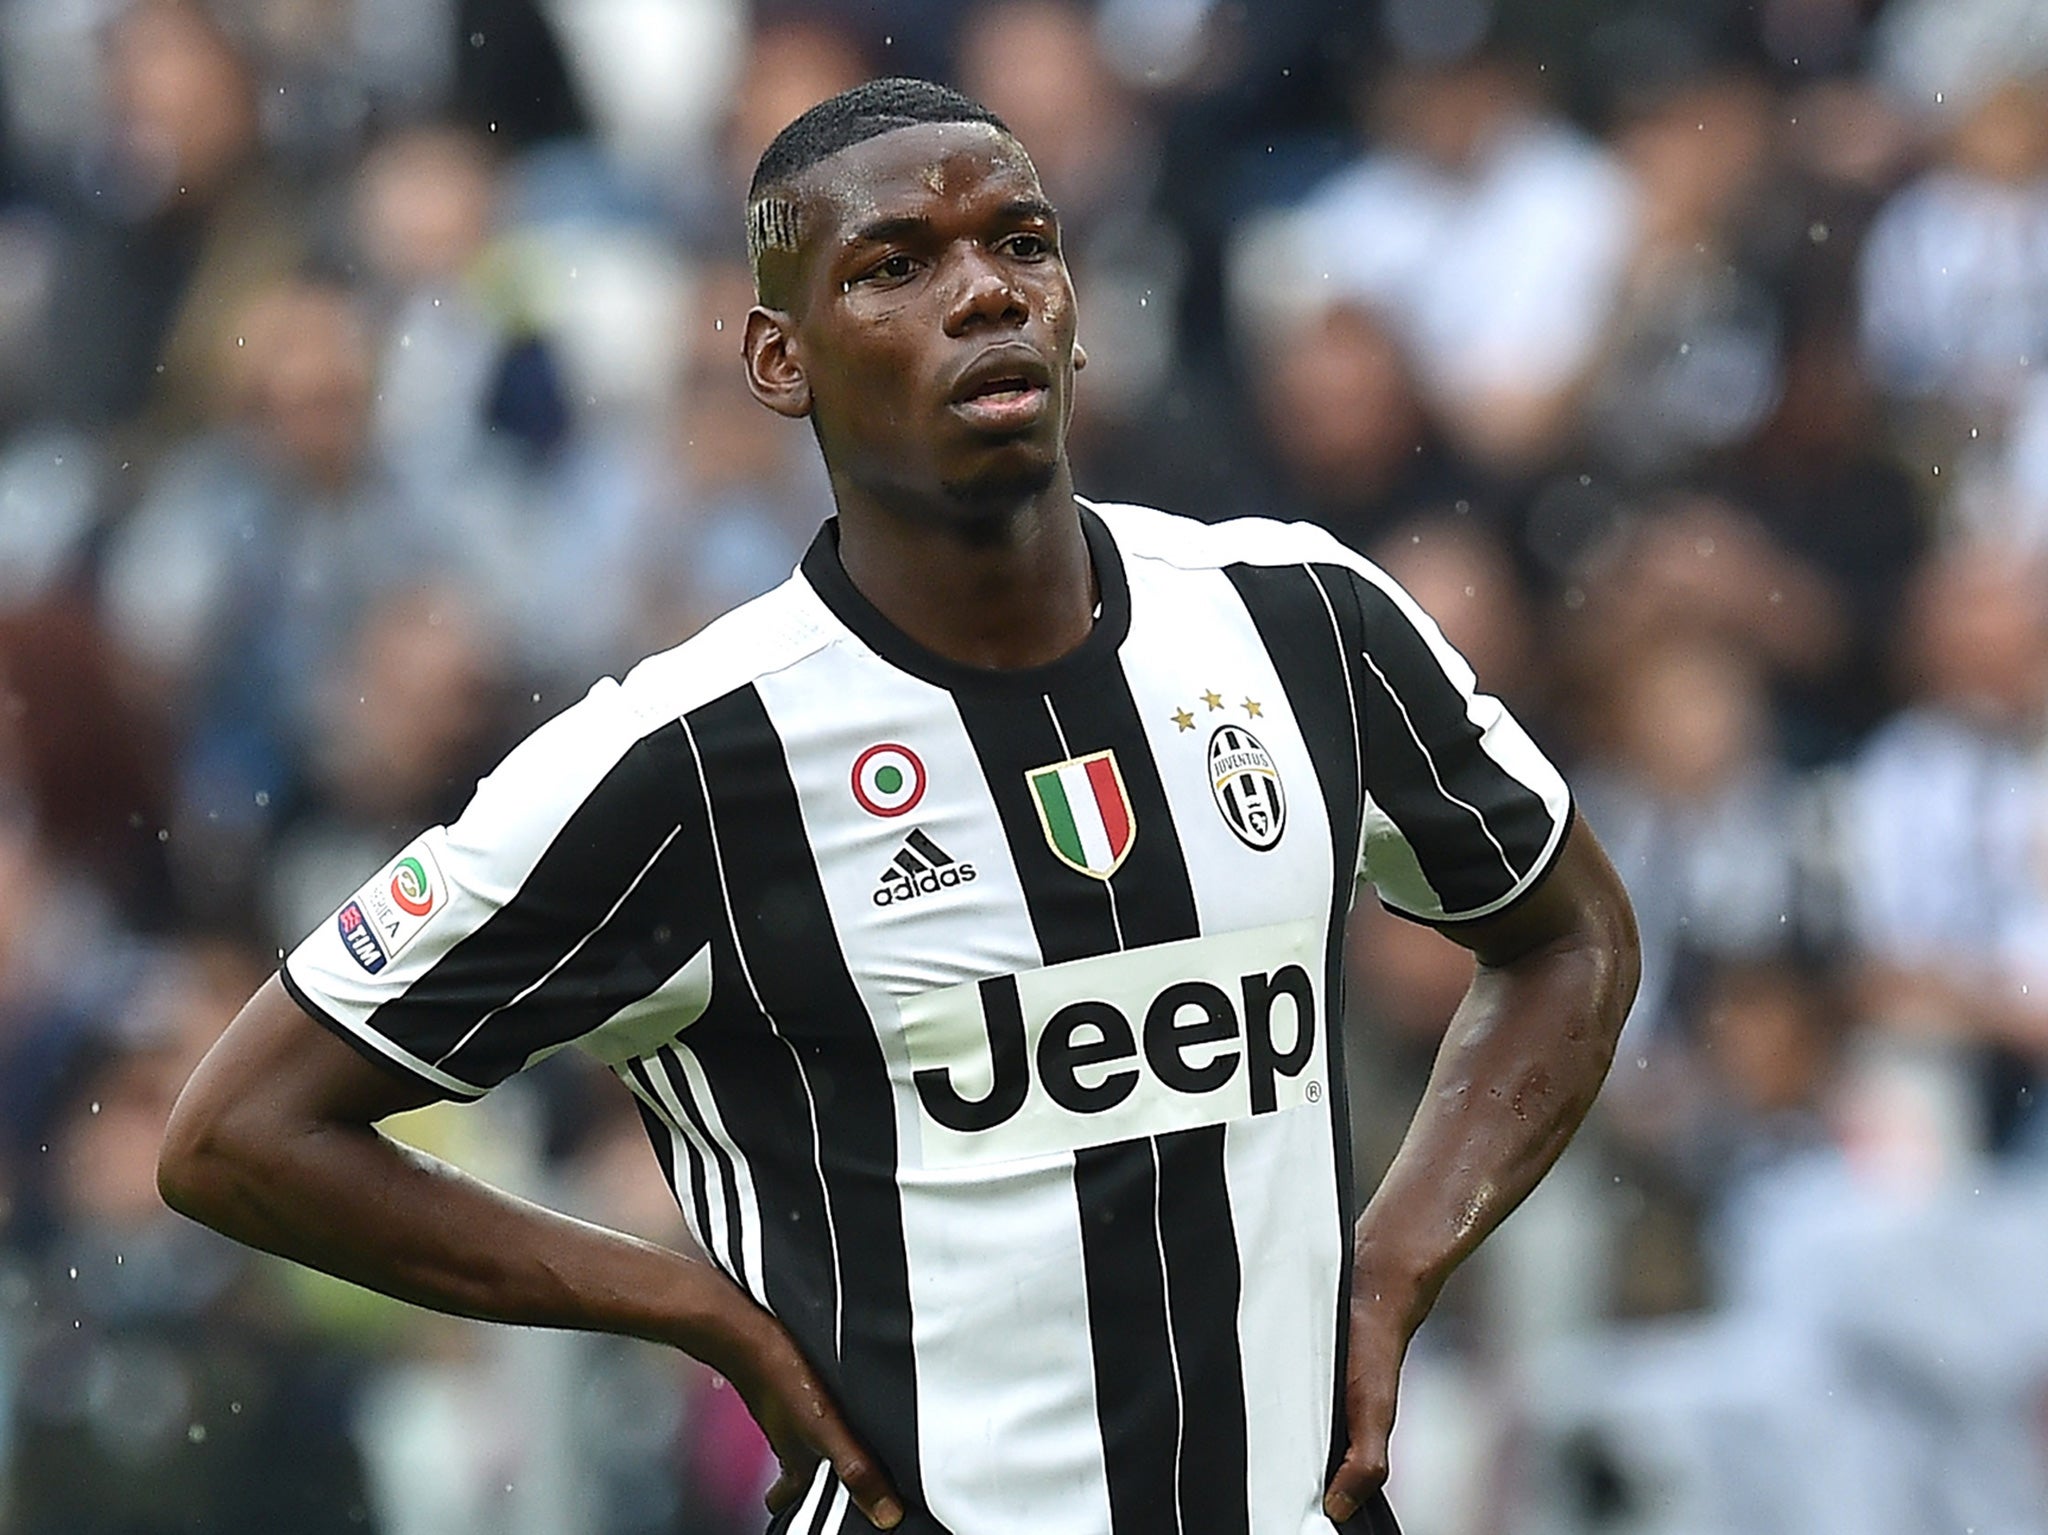 Pogba must be convinced by a compelling 'project', says agent Raiola